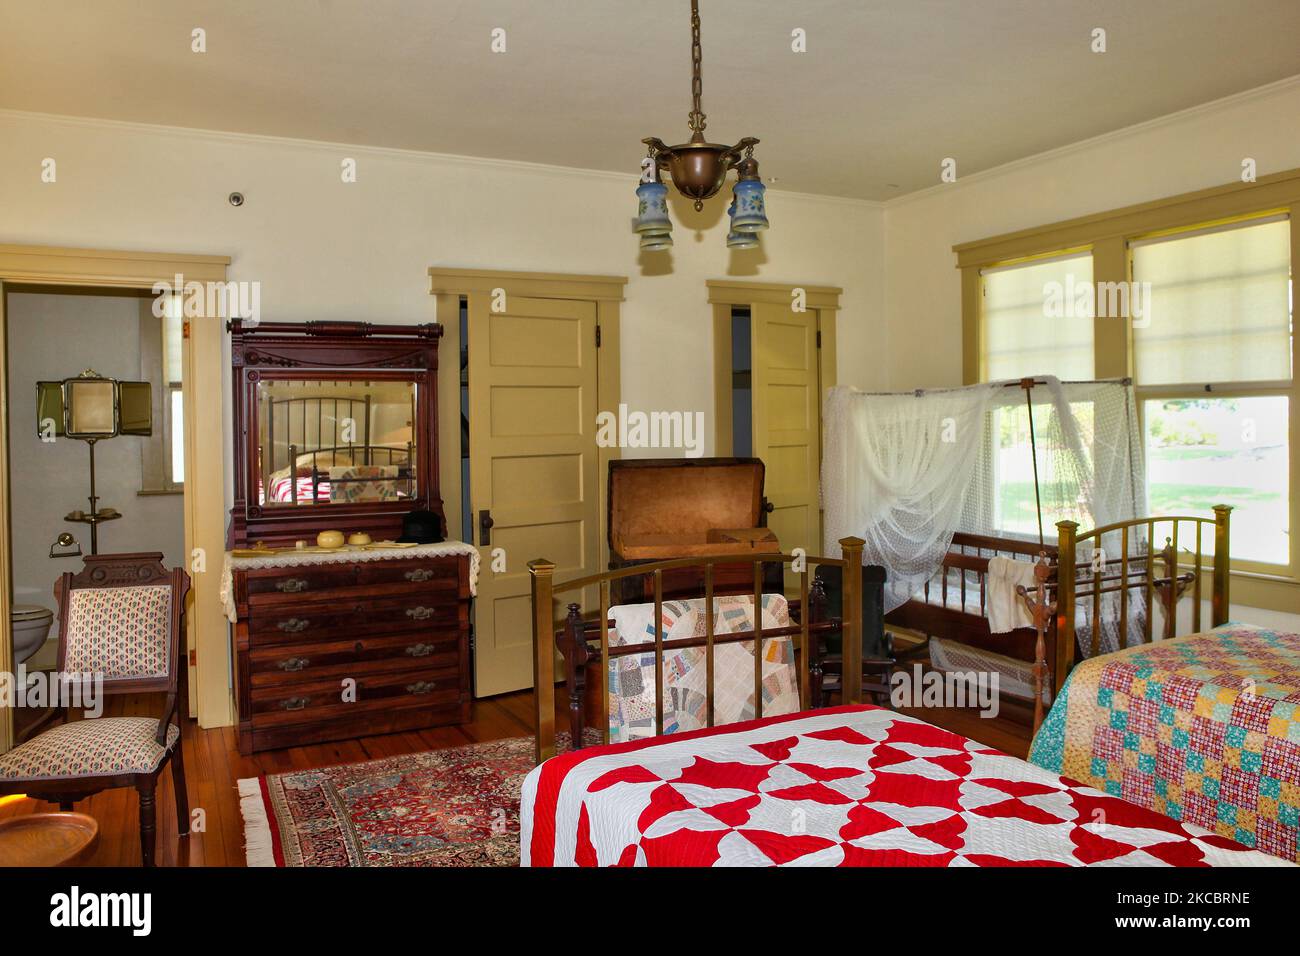 Guest bedroom at the Thomas Edison and Henry Ford Winter Estates in Fort Myers, Florida, USA. The Edison and Ford Winter Estates contain a historical museum and 21 acre botanical garden on the adjacent sites of the winter homes of Thomas Edison and Henry Ford beside the Caloosahatchee River in southwestern Florida. (Photo by Creative Touch Imaging Ltd./NurPhoto) Stock Photo